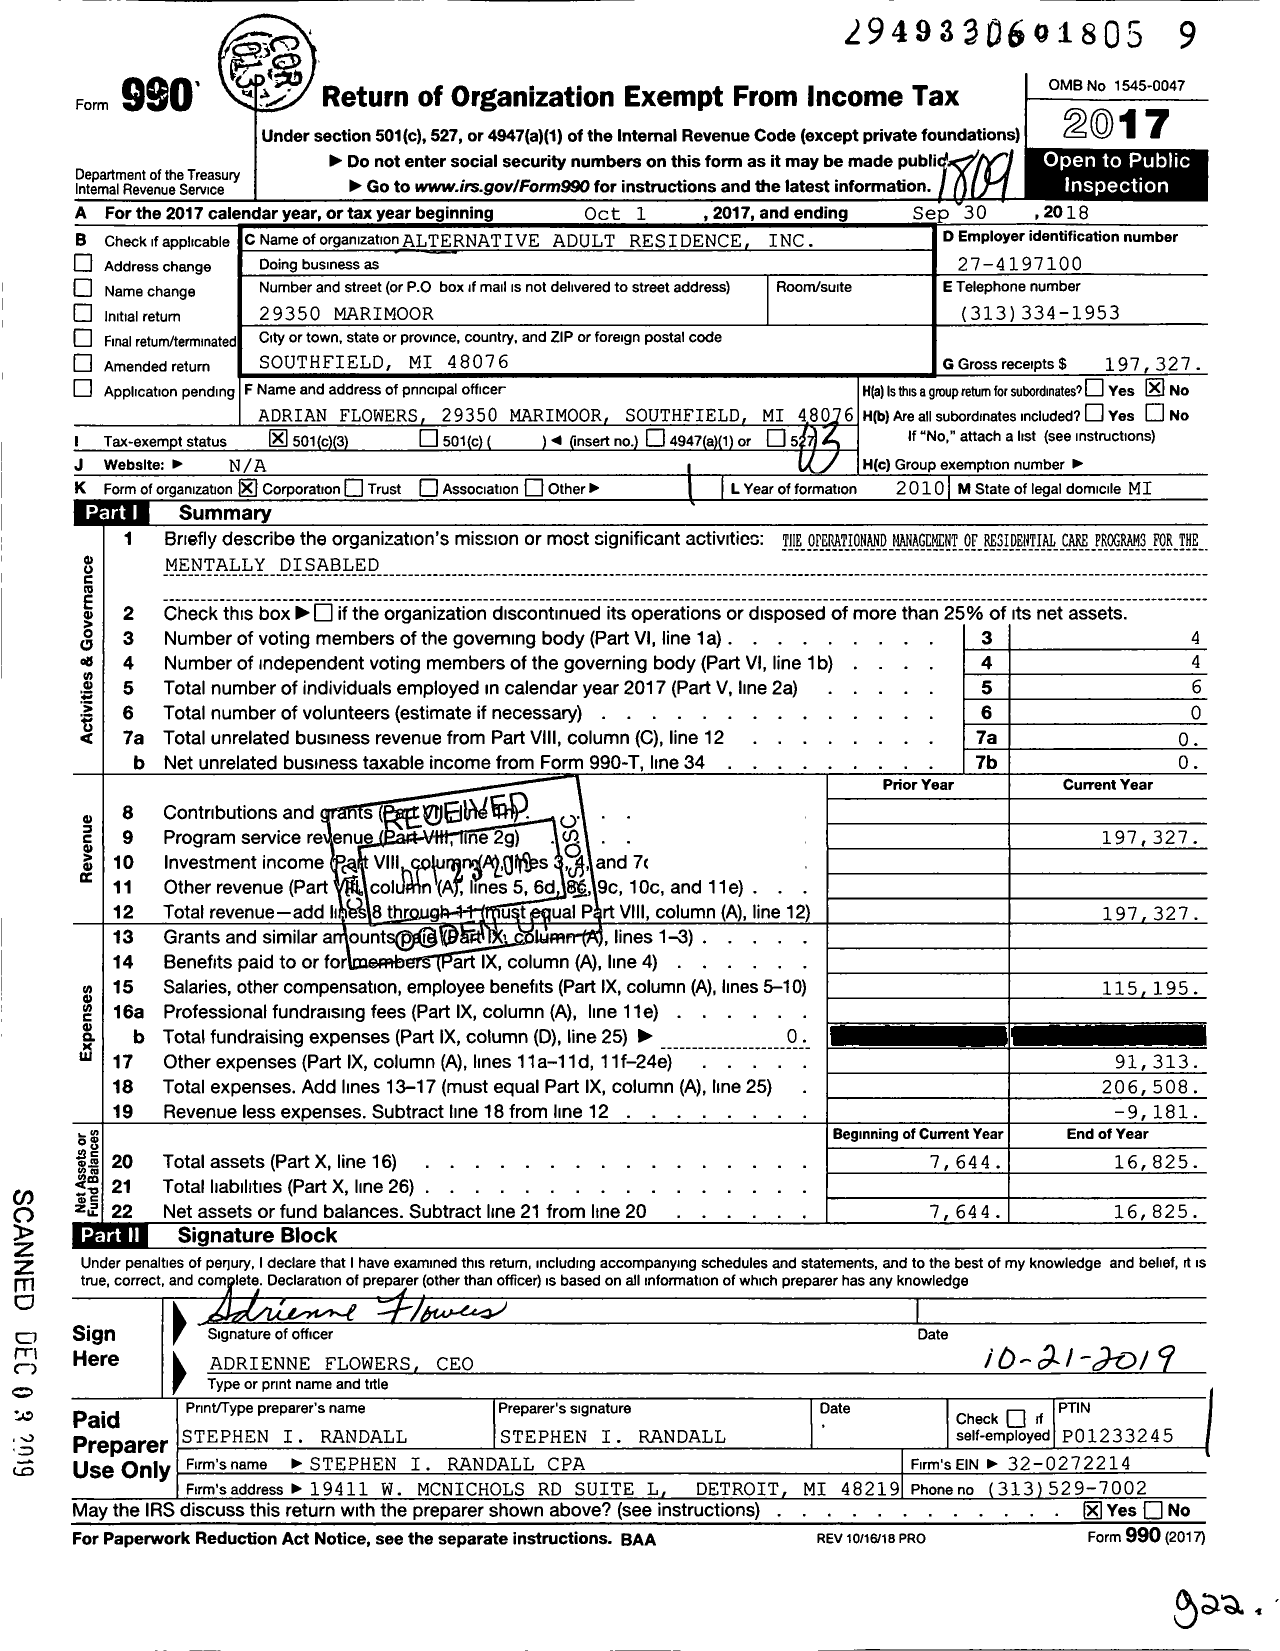 Image of first page of 2017 Form 990 for Alternative Adult Residence